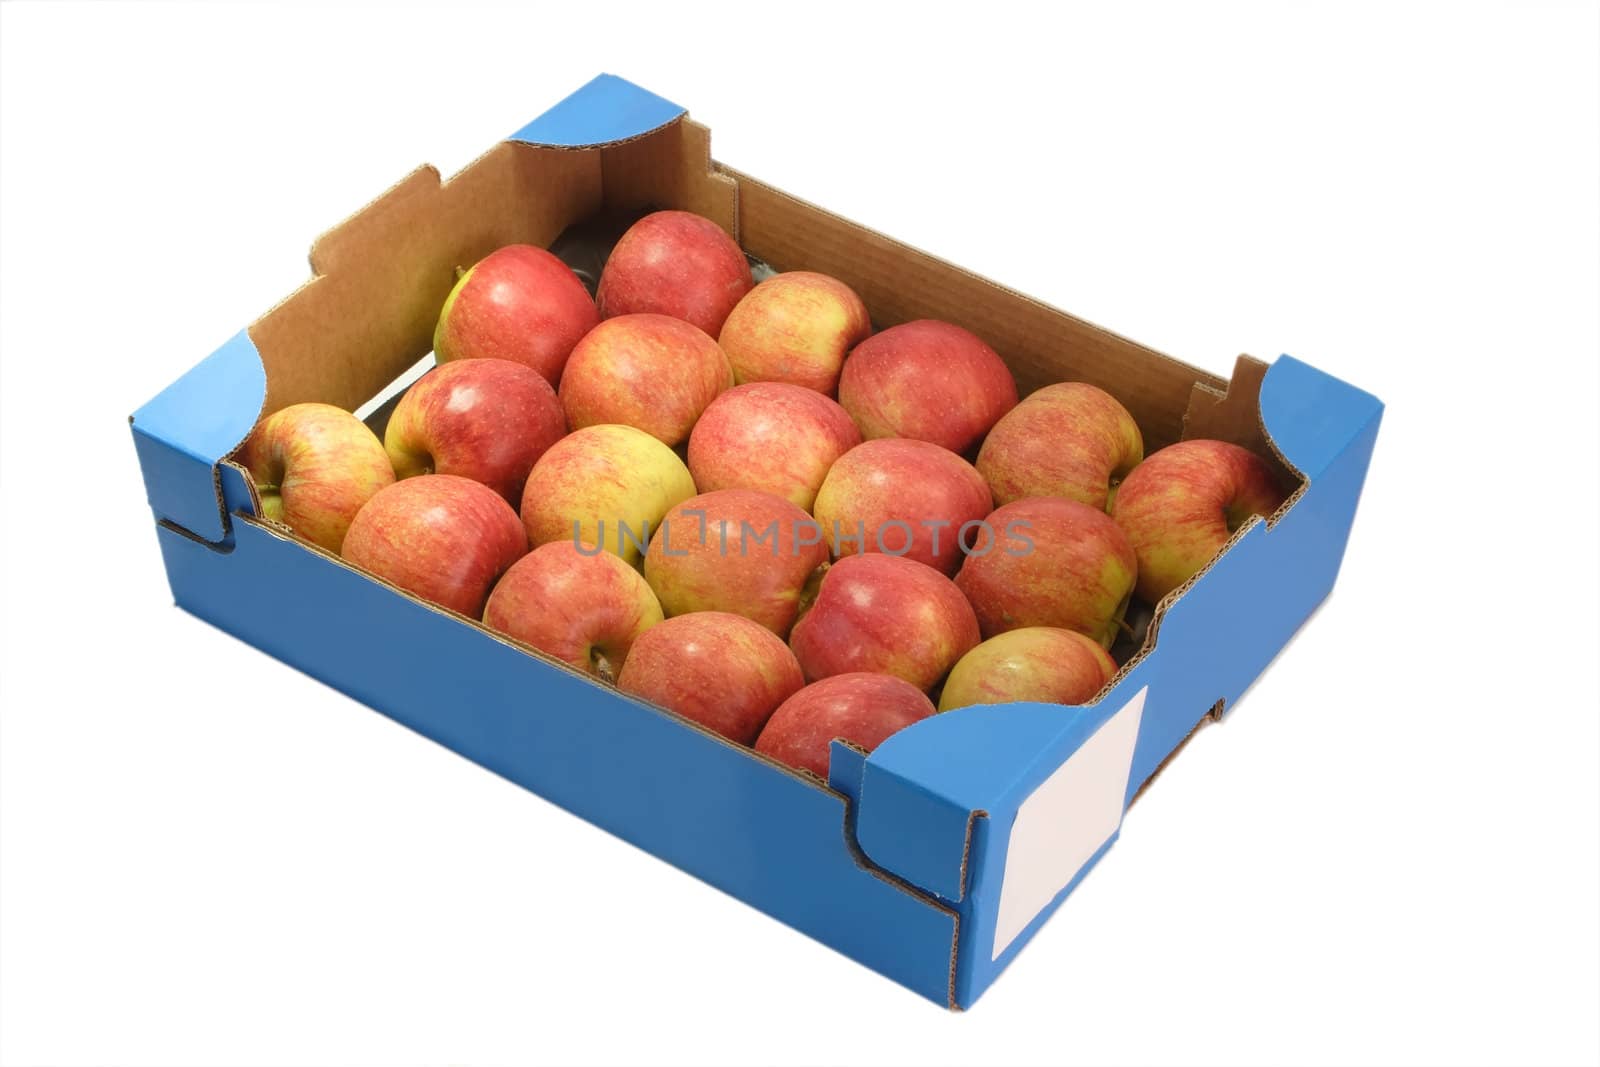 Apples in a cardboard box isolated on white background